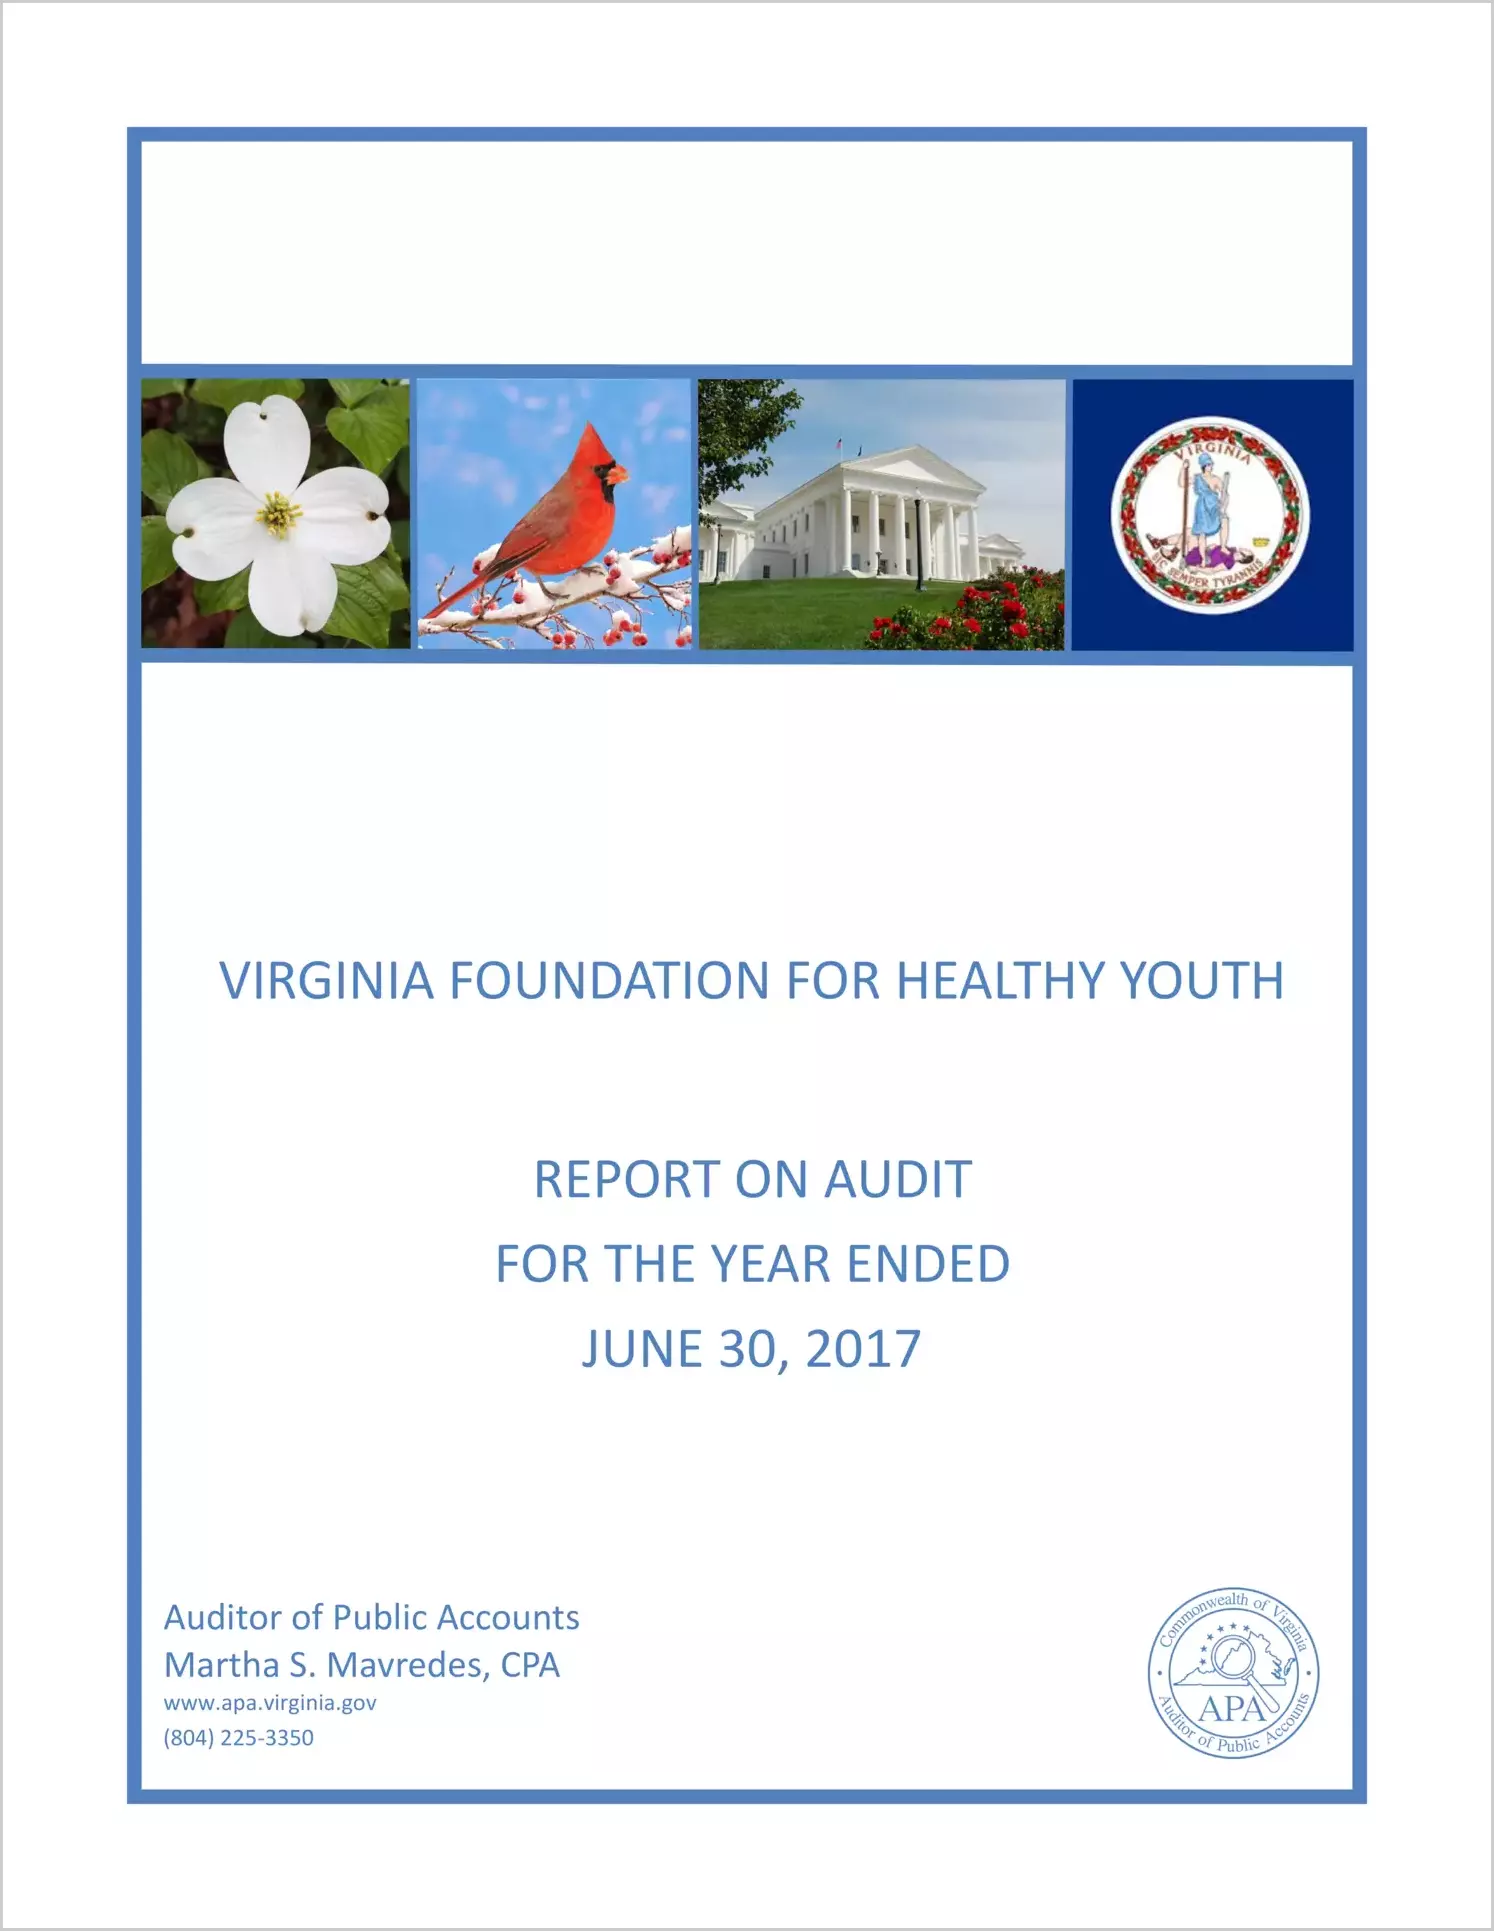 Virginia Foundation for Healthy Youth for the year ended June 30, 2017